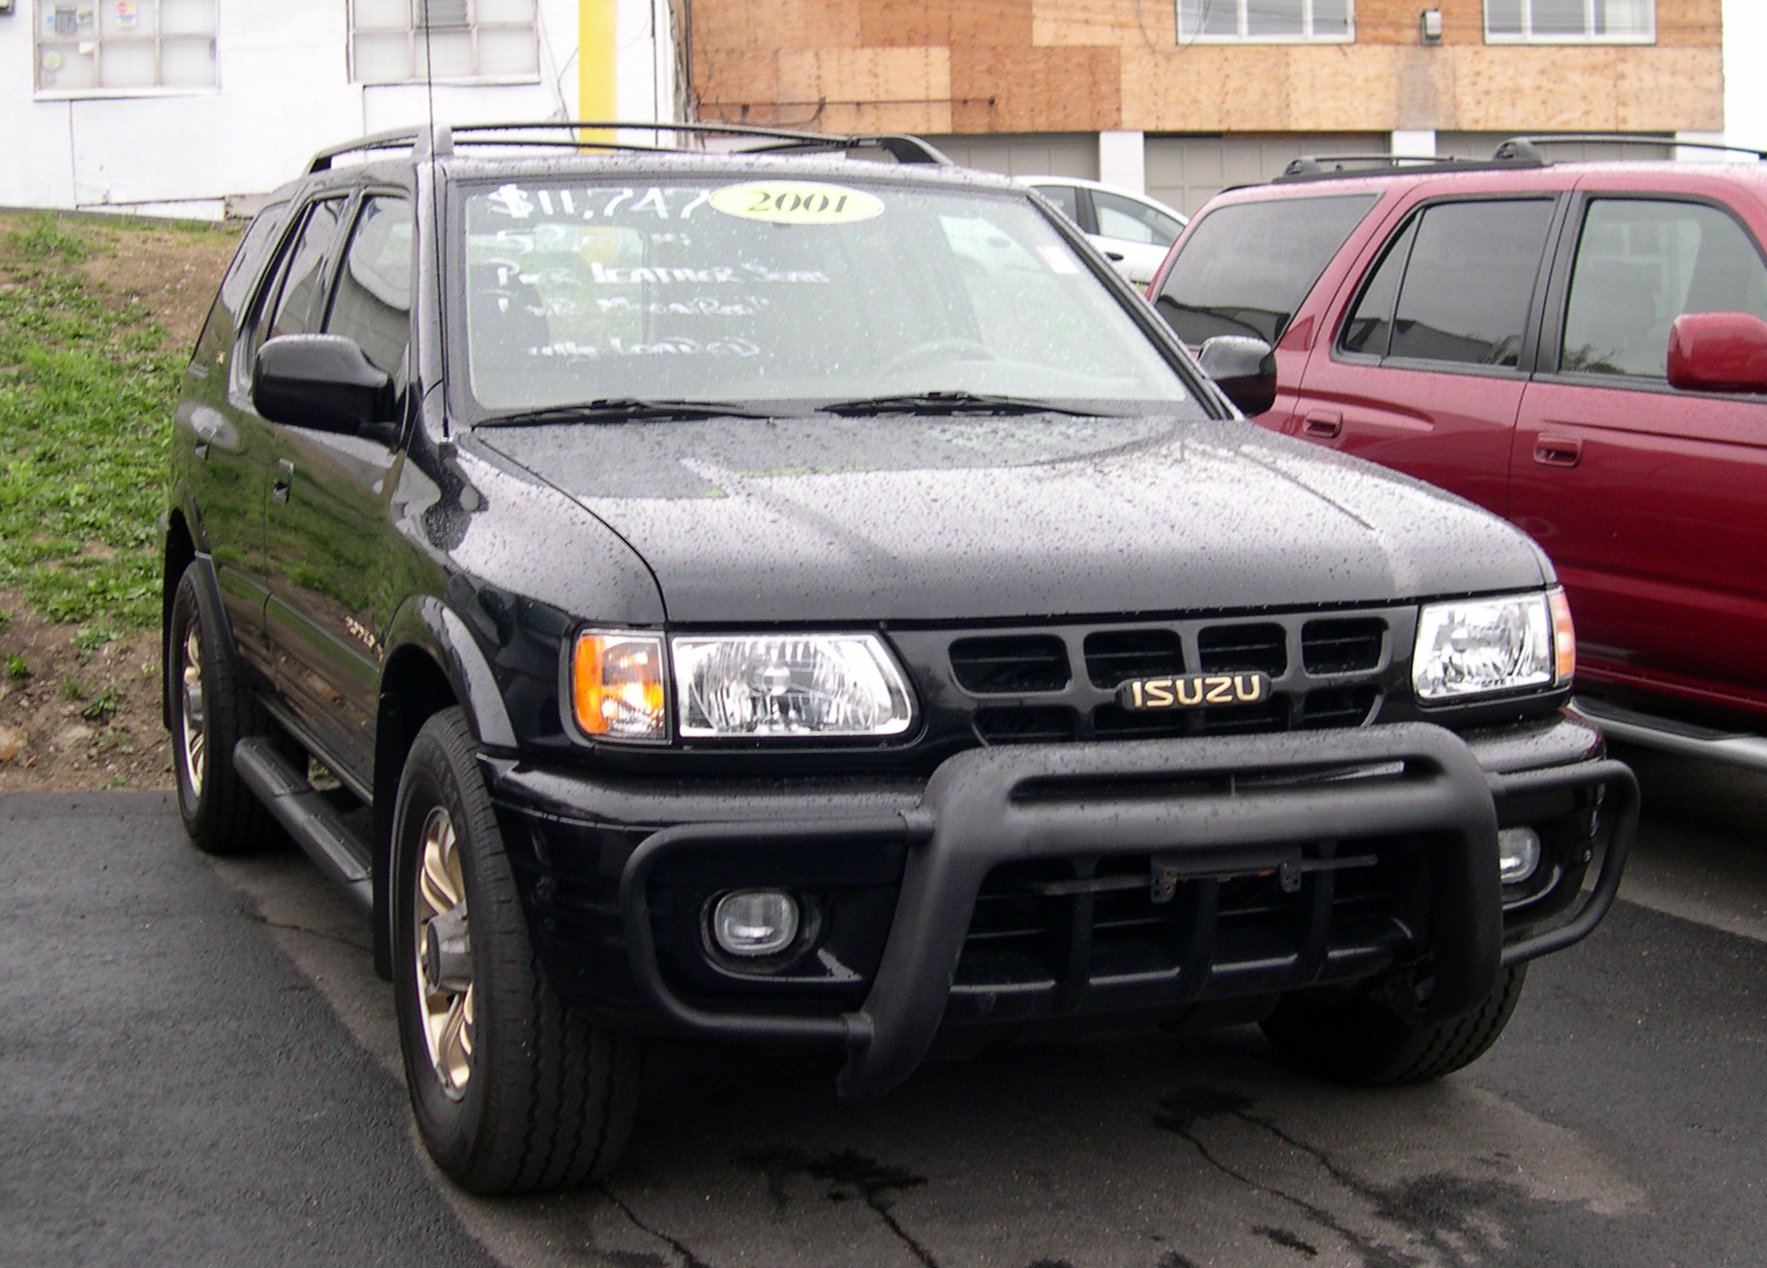 Isuzu Rodeo 2001 🚘 Review, Pictures and Images - Look at the car